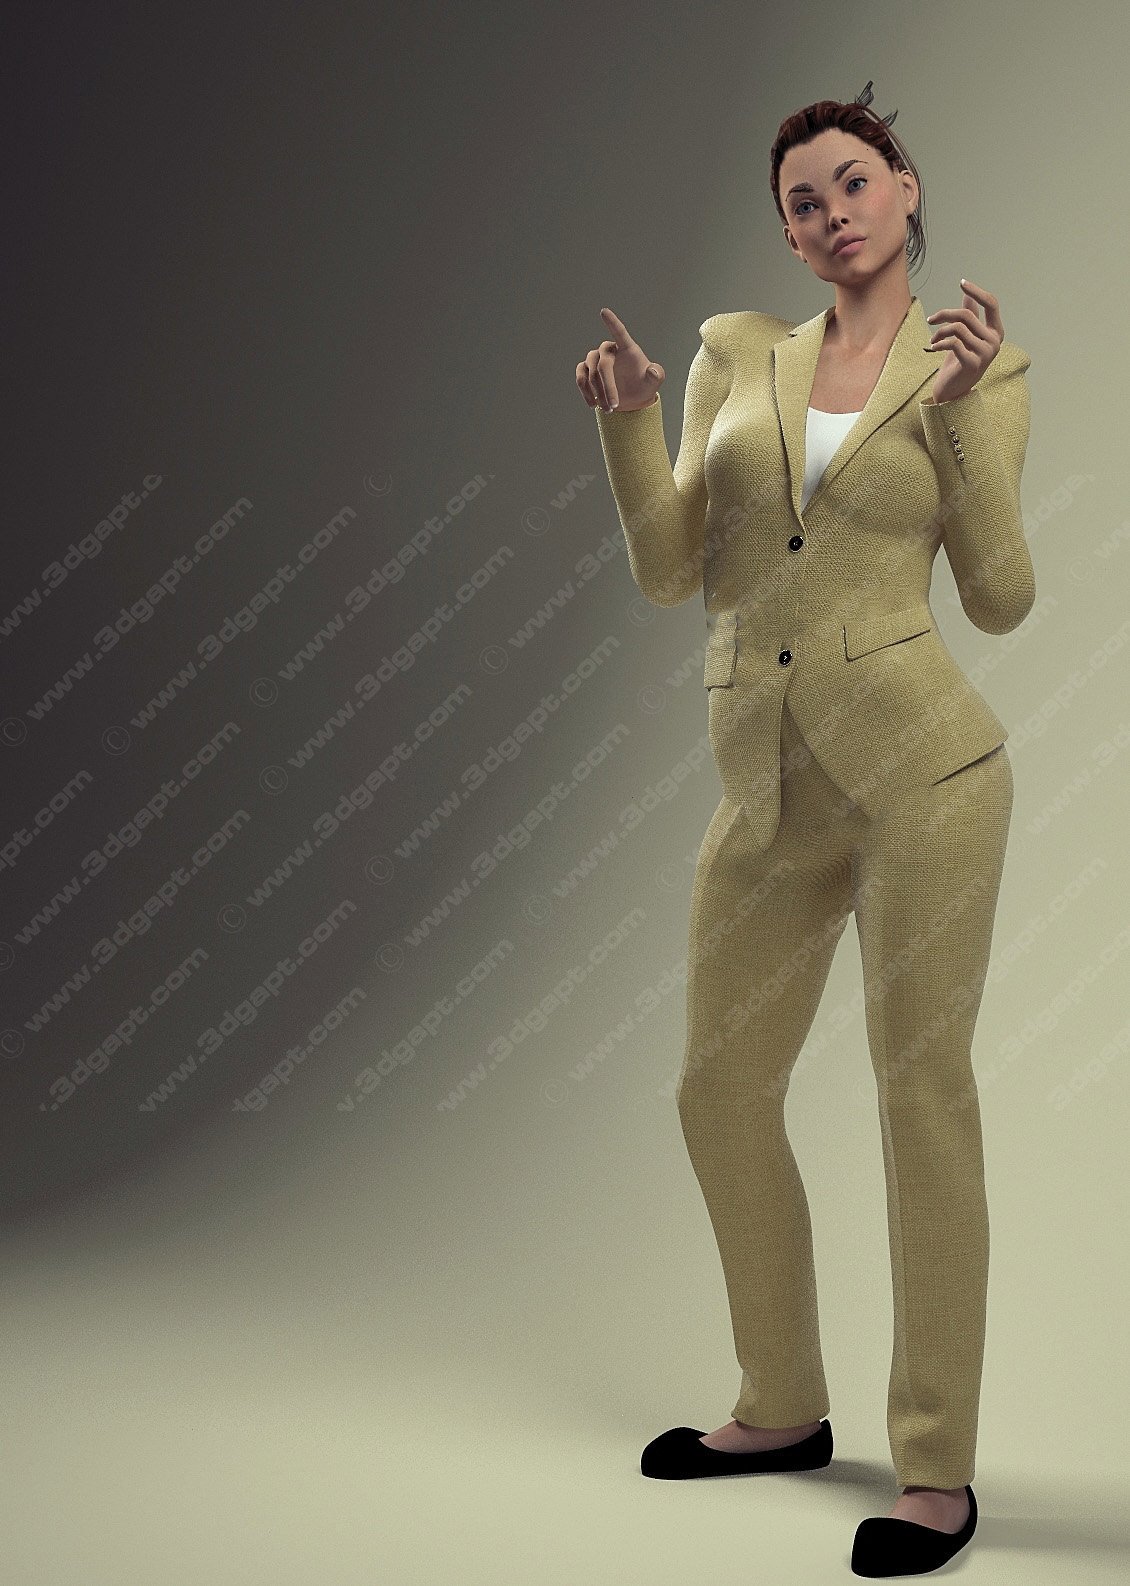 Woman in dress and suit 15